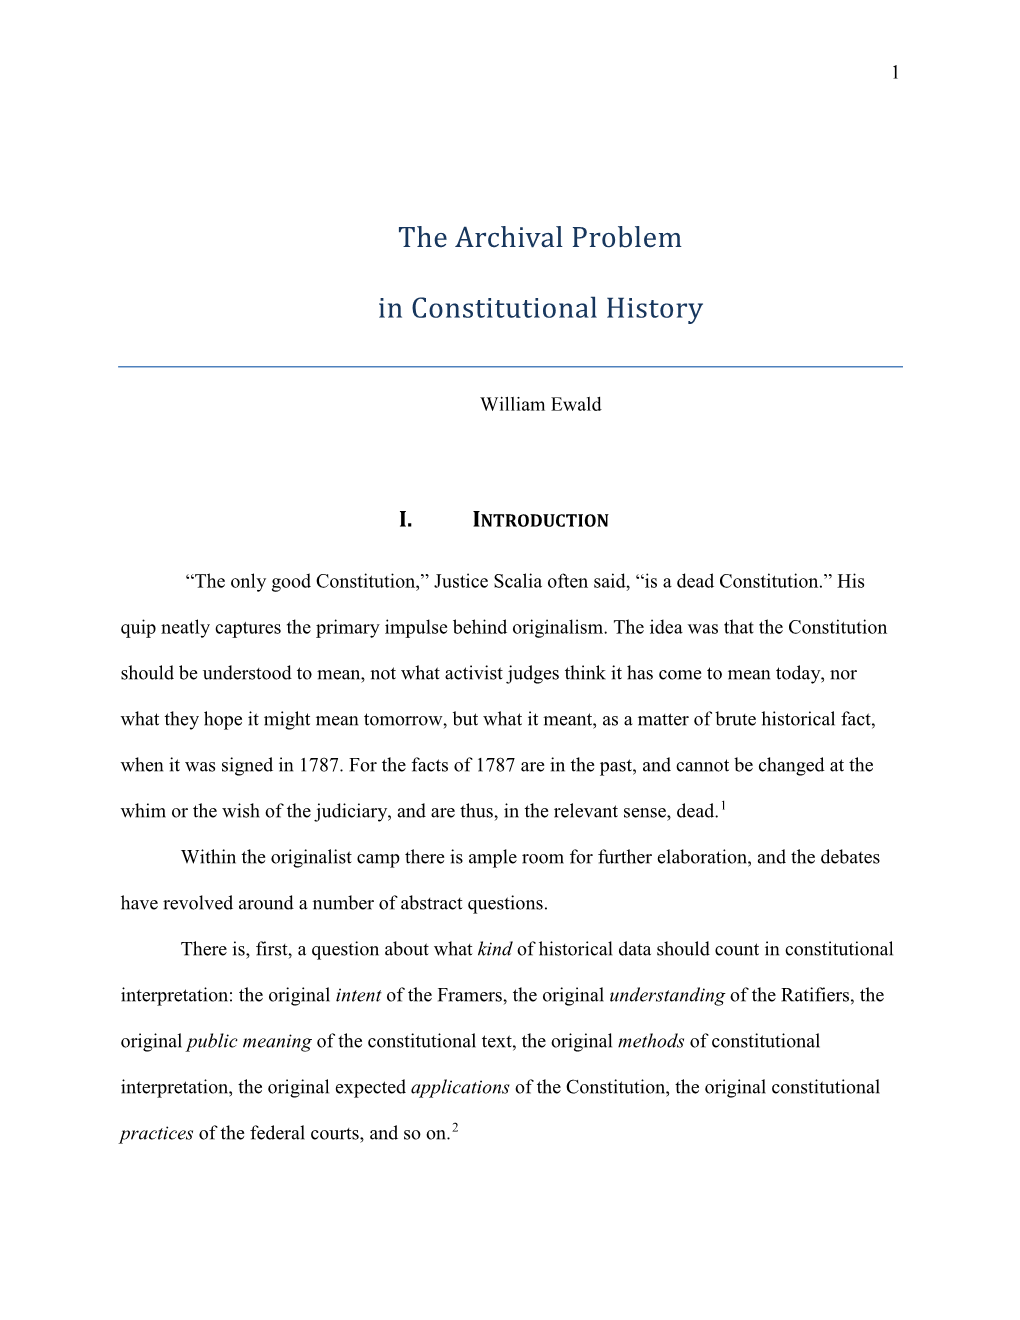 The Archival Problem in Constitutional History